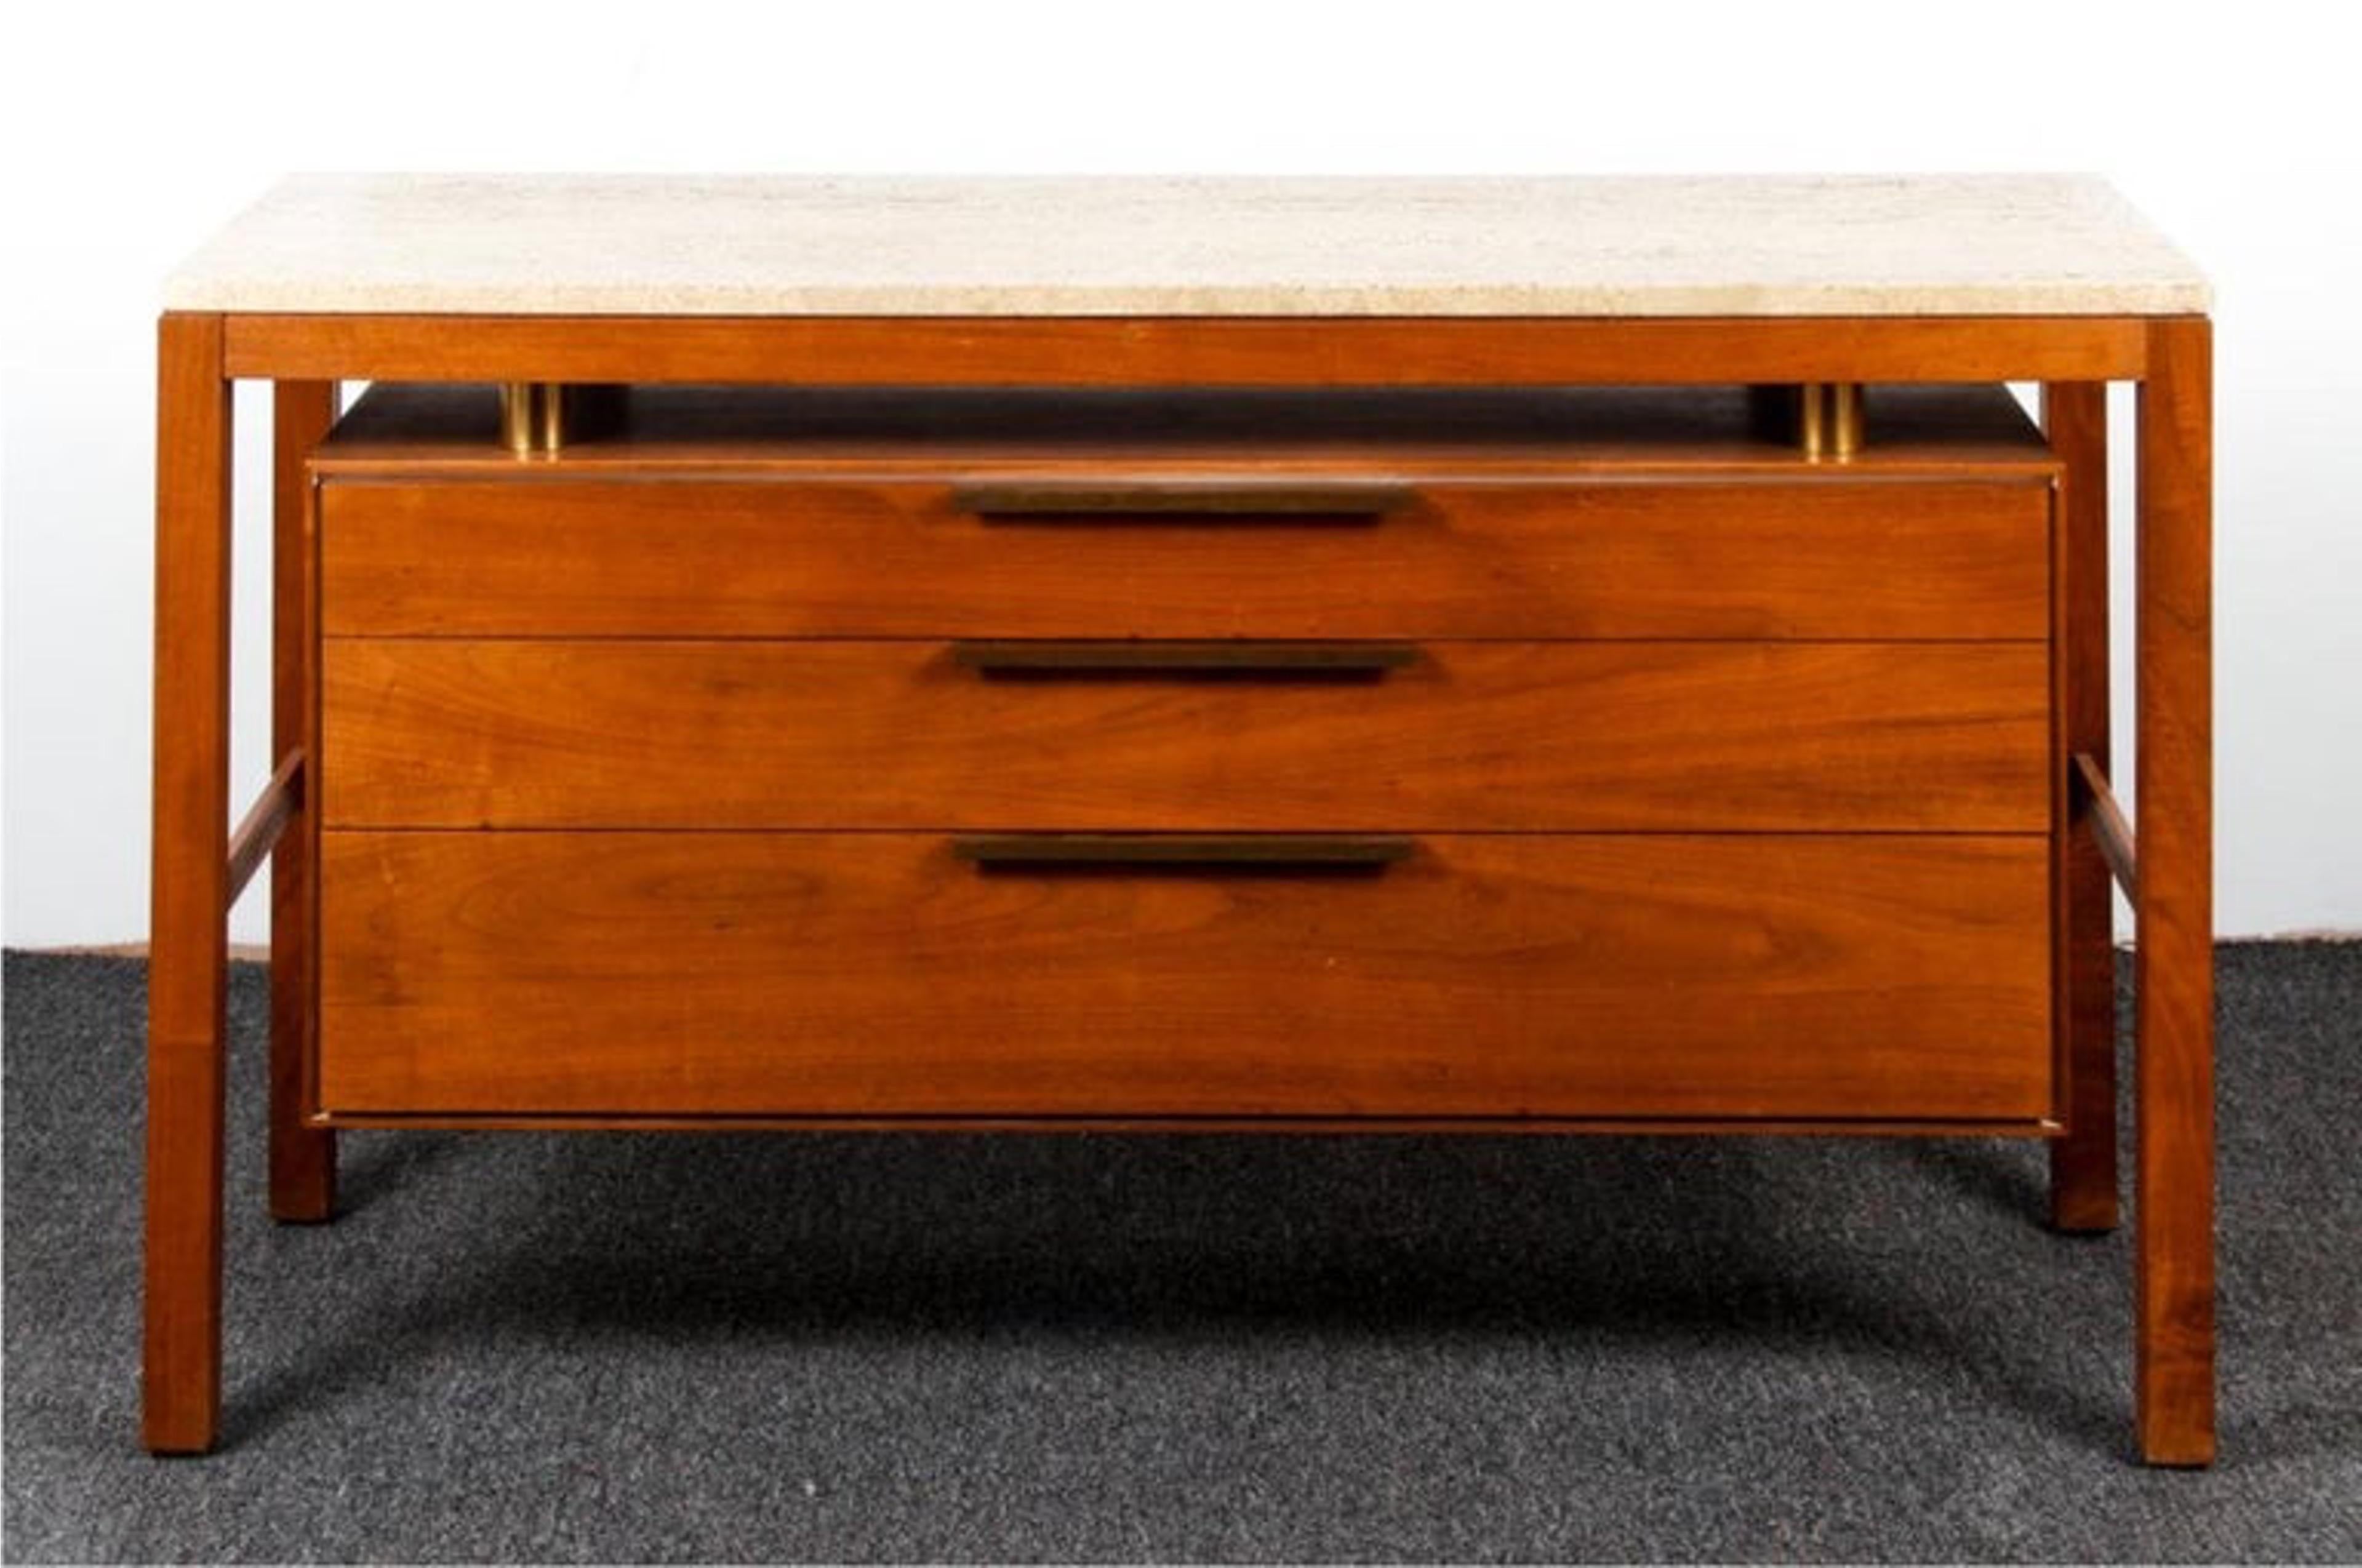 Presenting a remarkable pair of custom Mid-Century Modern sideboards/cabinets meticulously crafted by the renowned designer Vladimir Kagan in 1961. These exquisite pieces are constructed from rich walnut and feature elegant travertine tops that add